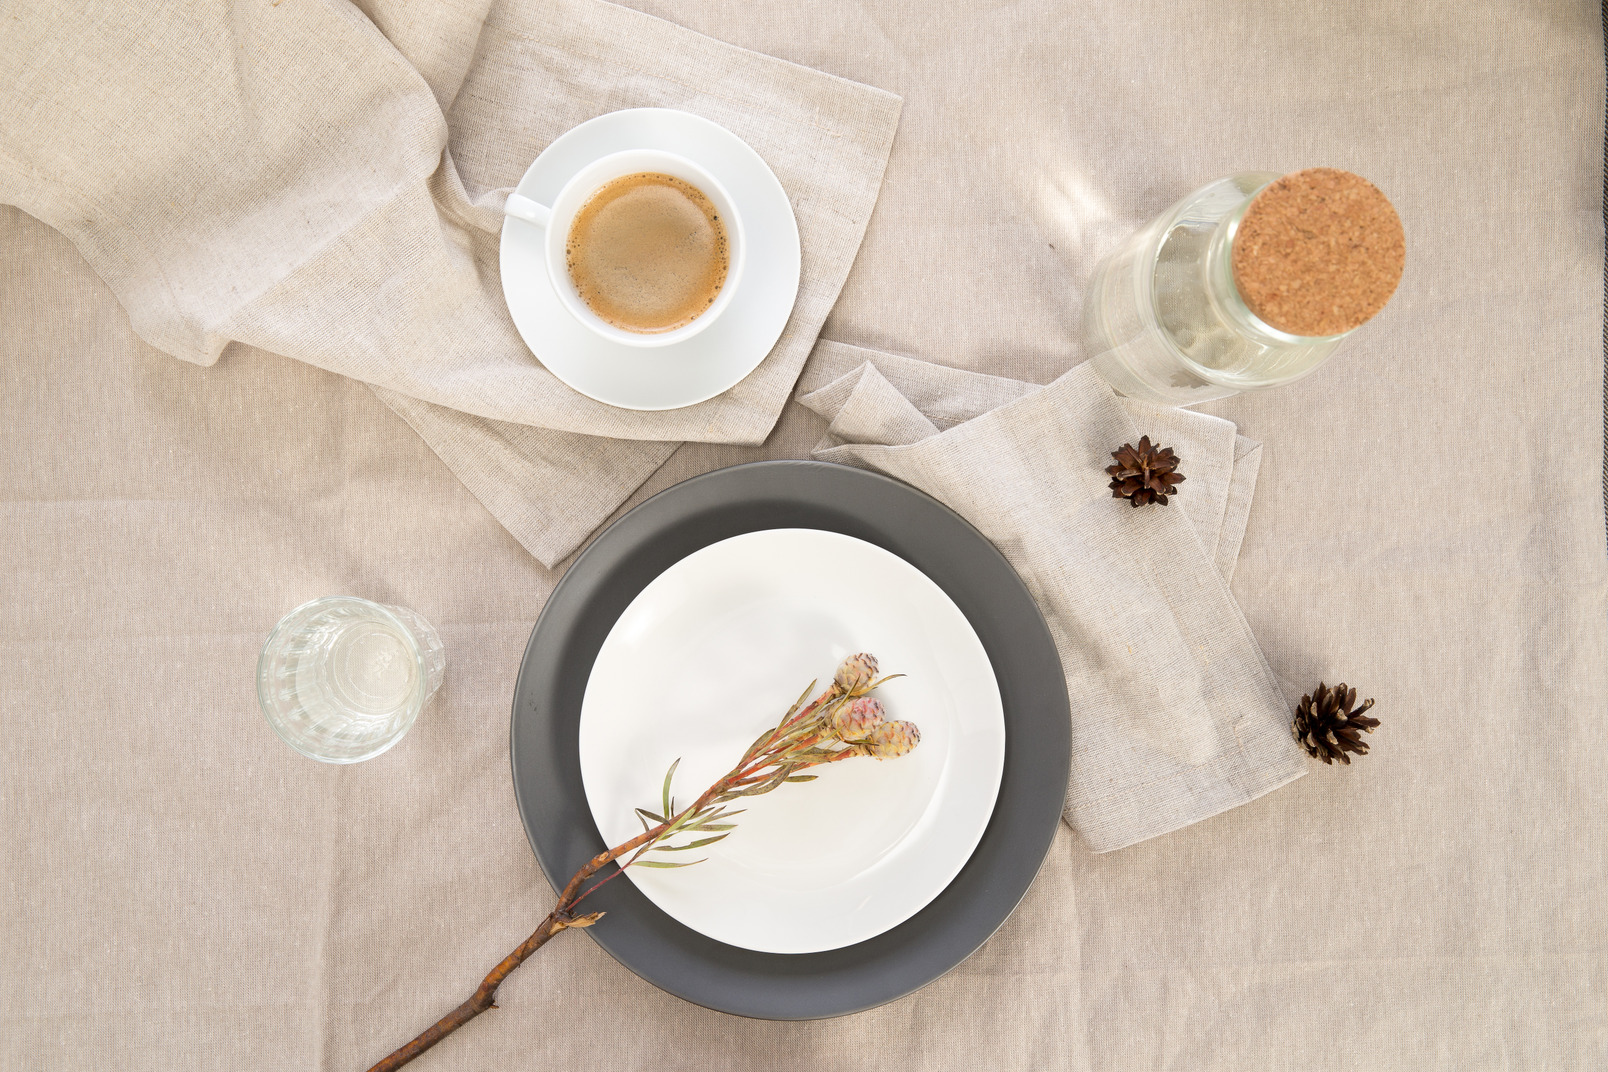 Black and white plates with flower twigs, moka, cup of coffee, glass bottle and glass of water on tablecloth